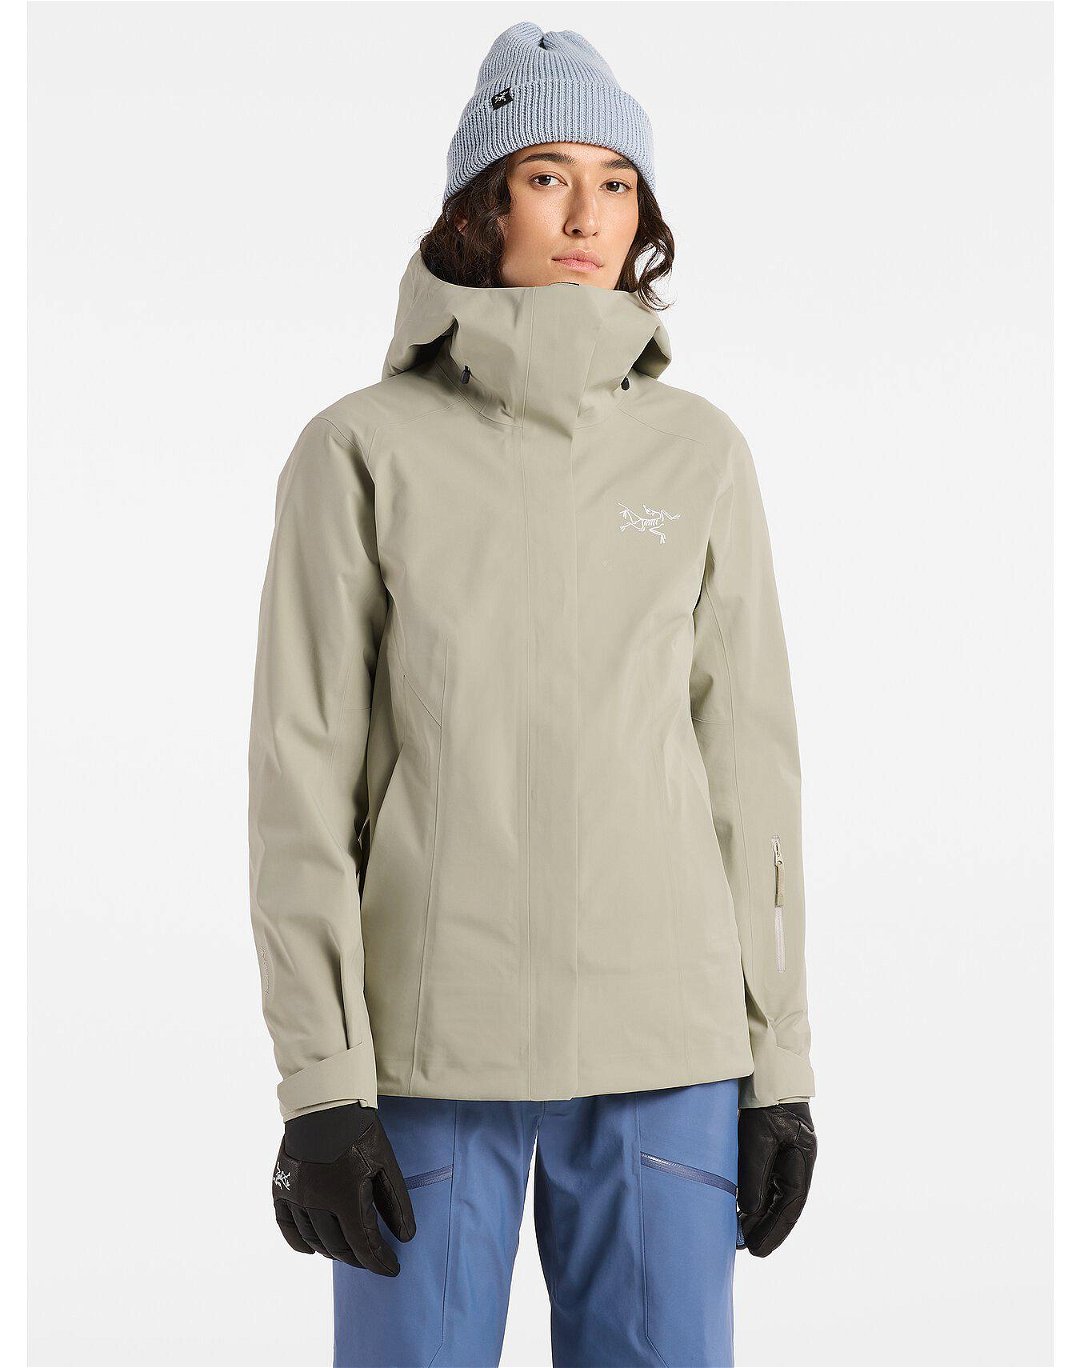 Andessa Shell Jacket Women's by ARC'TERYX | jellibeans